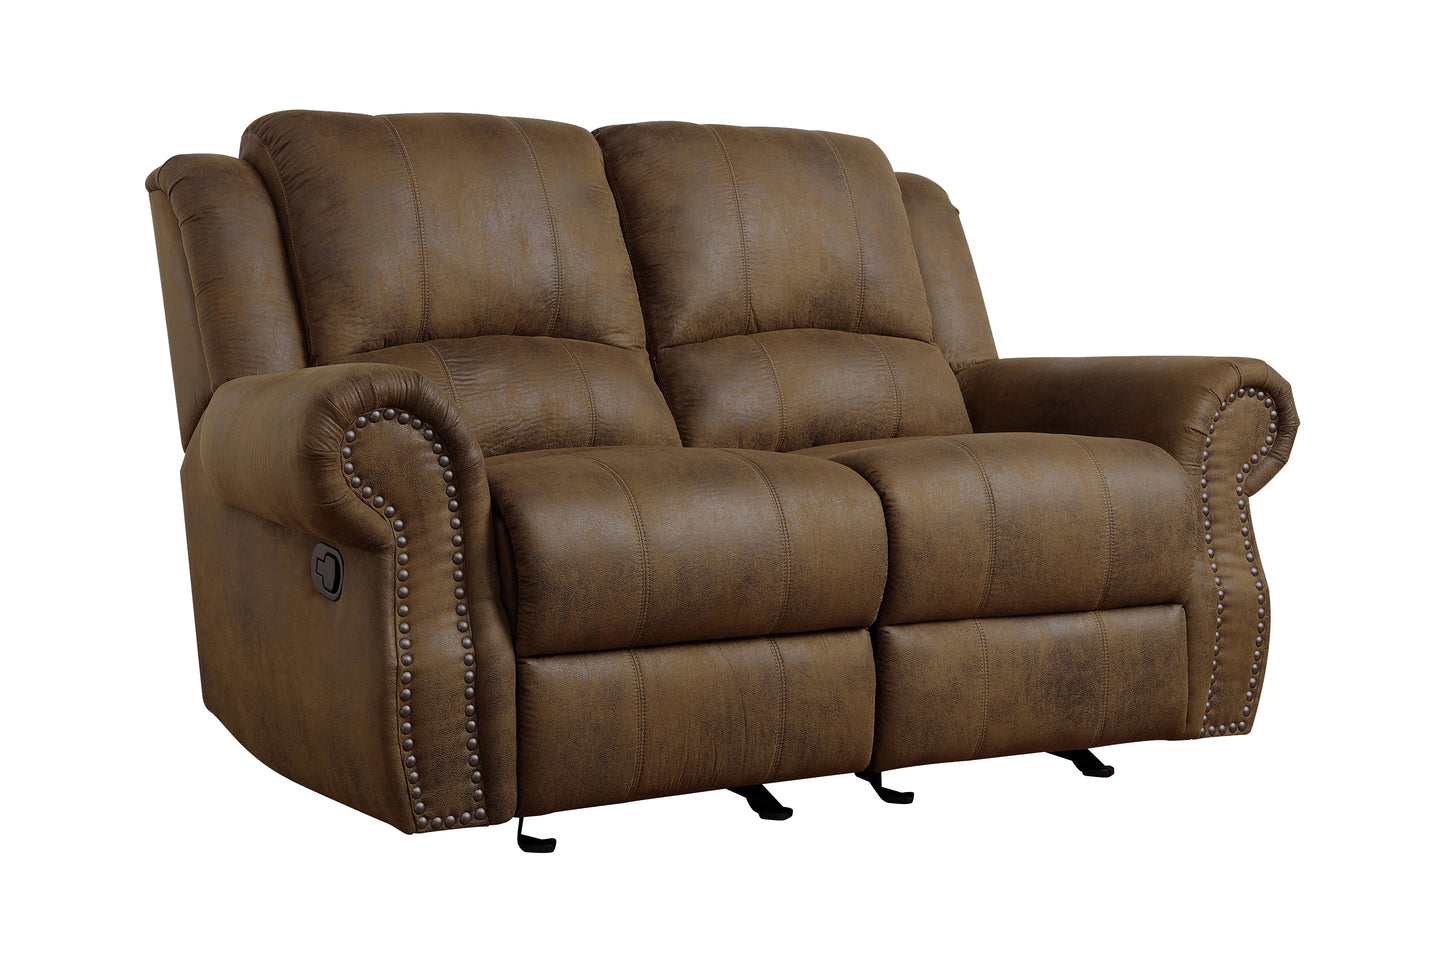 Sir Rawlinson by Coaster Furniture Motion Sofa Collection